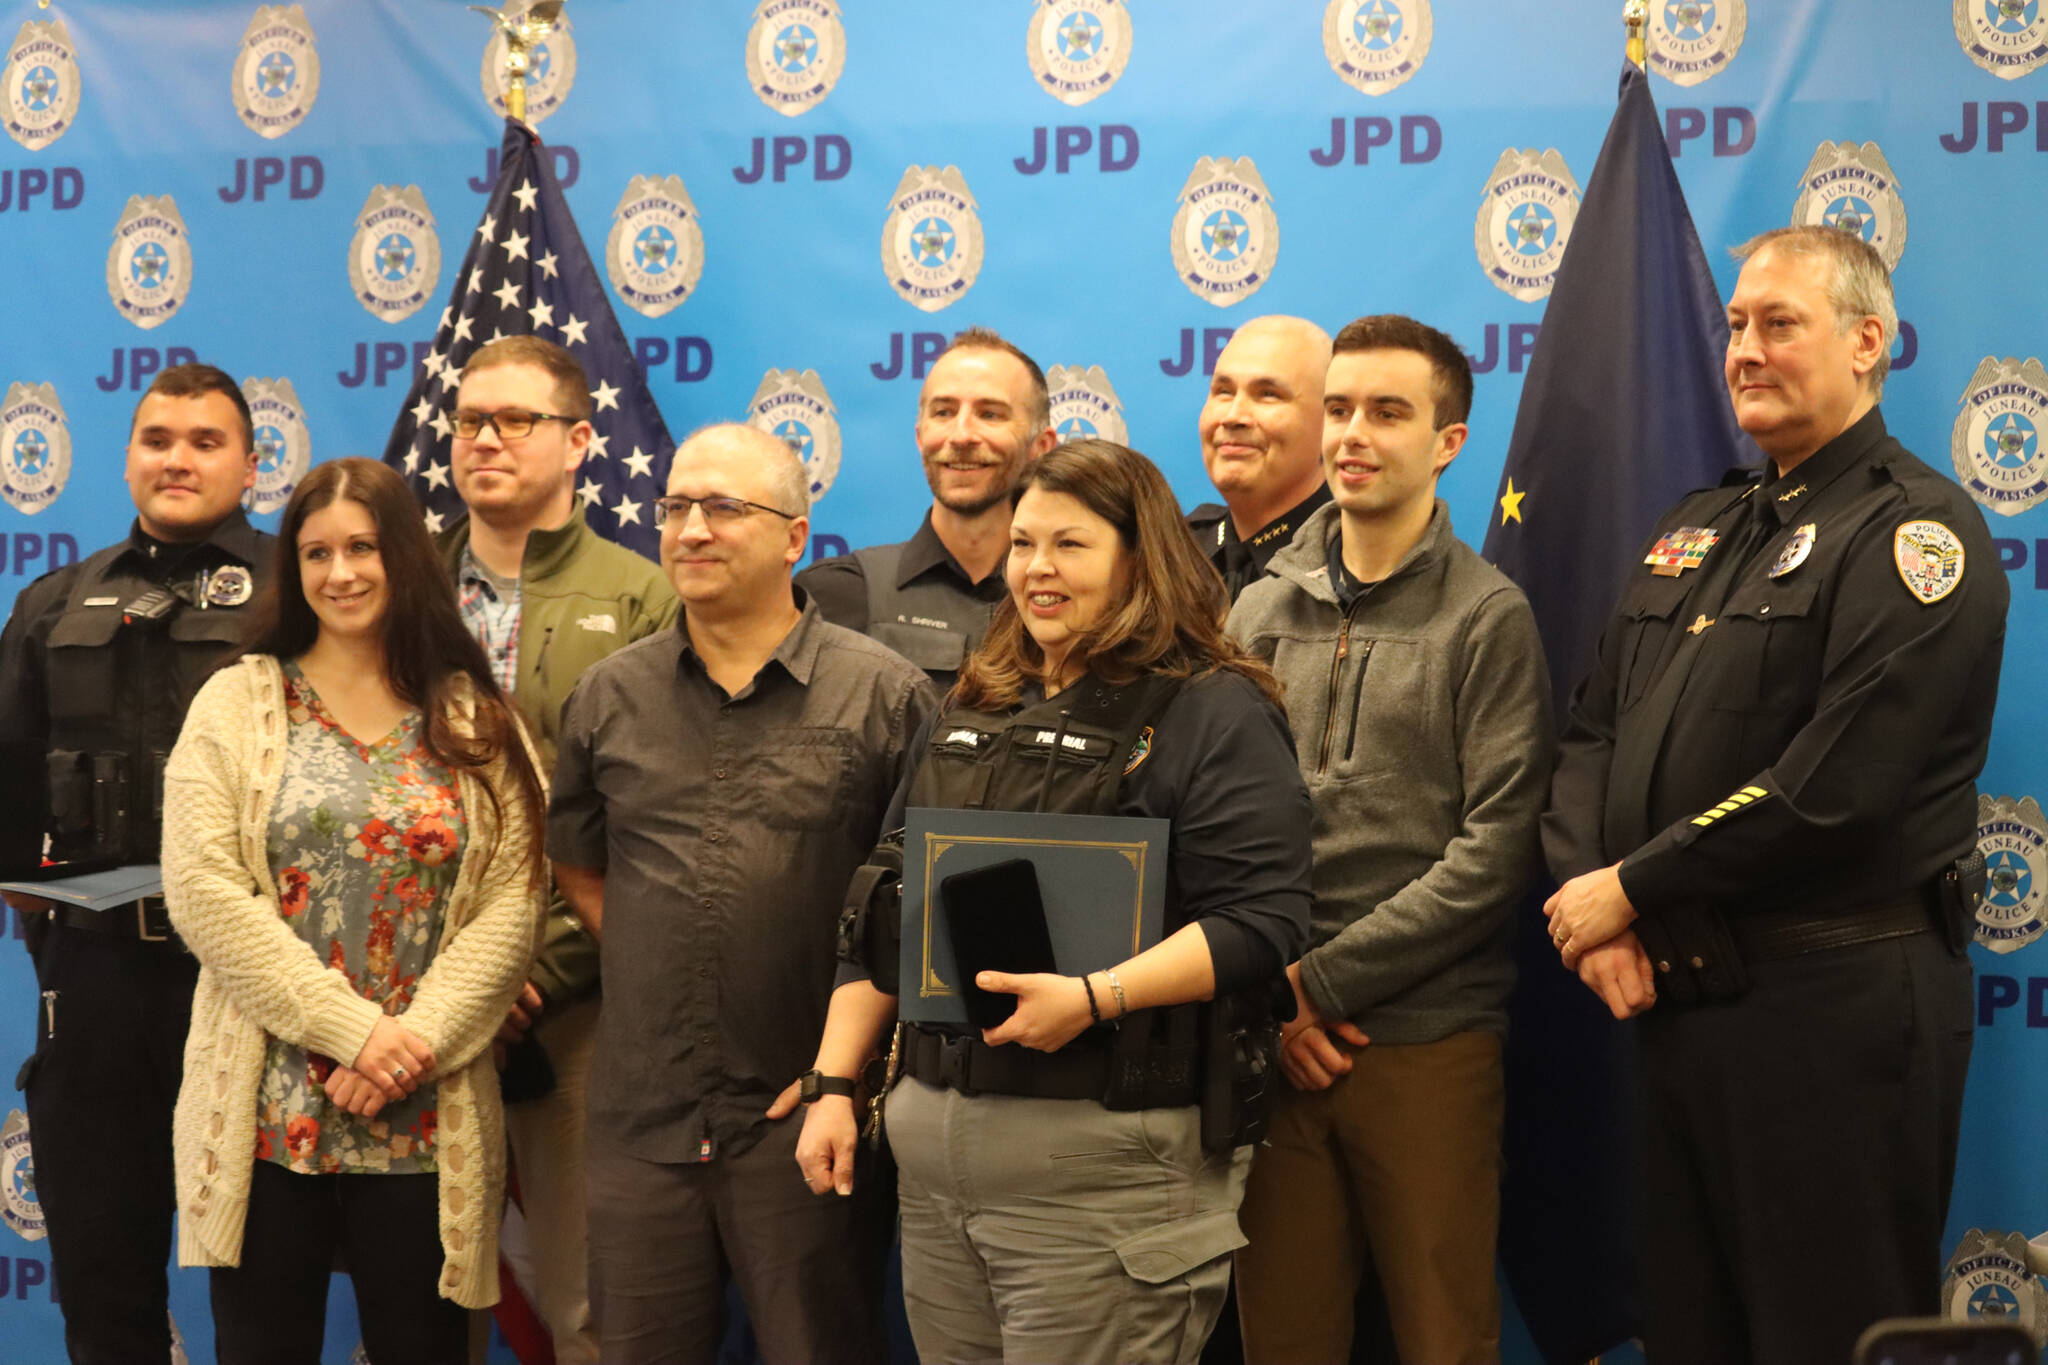 Members of the Juneau Police Department pose for a group photo during the annual JPD awards ceremony on Monday. (Jonson Kuhn / Juneau Empire)